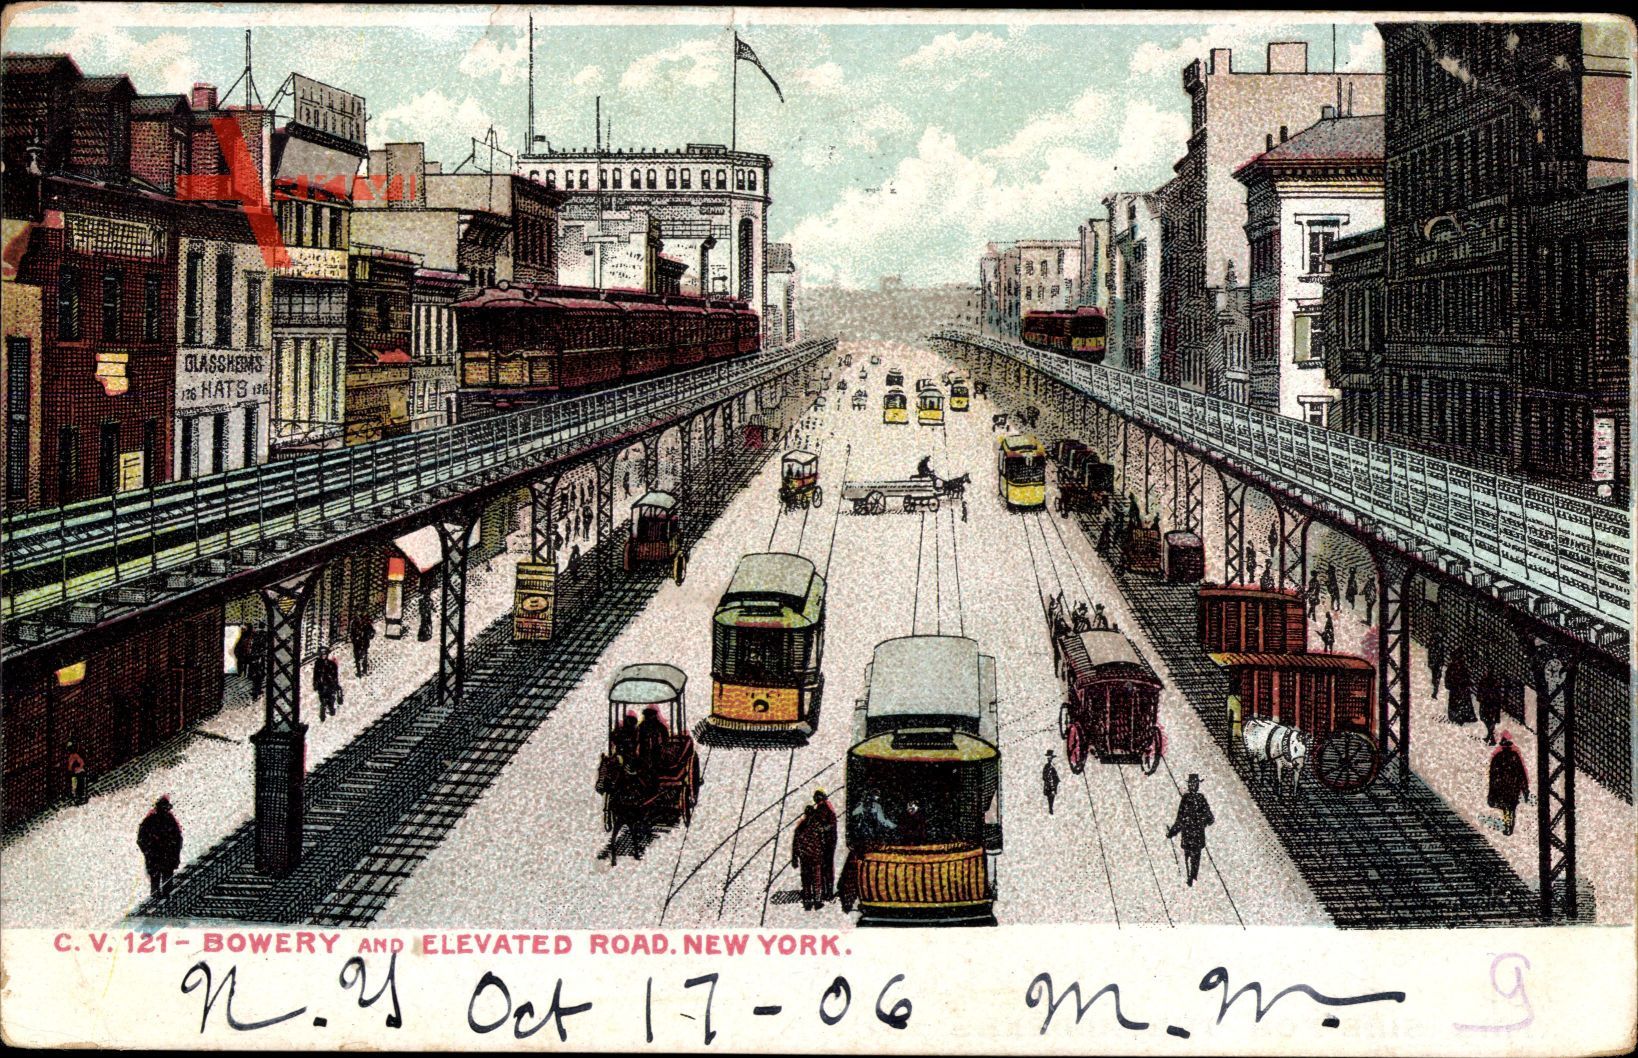 New York City USA, Bowery and elevated road, cable cars, Straßenbahnen